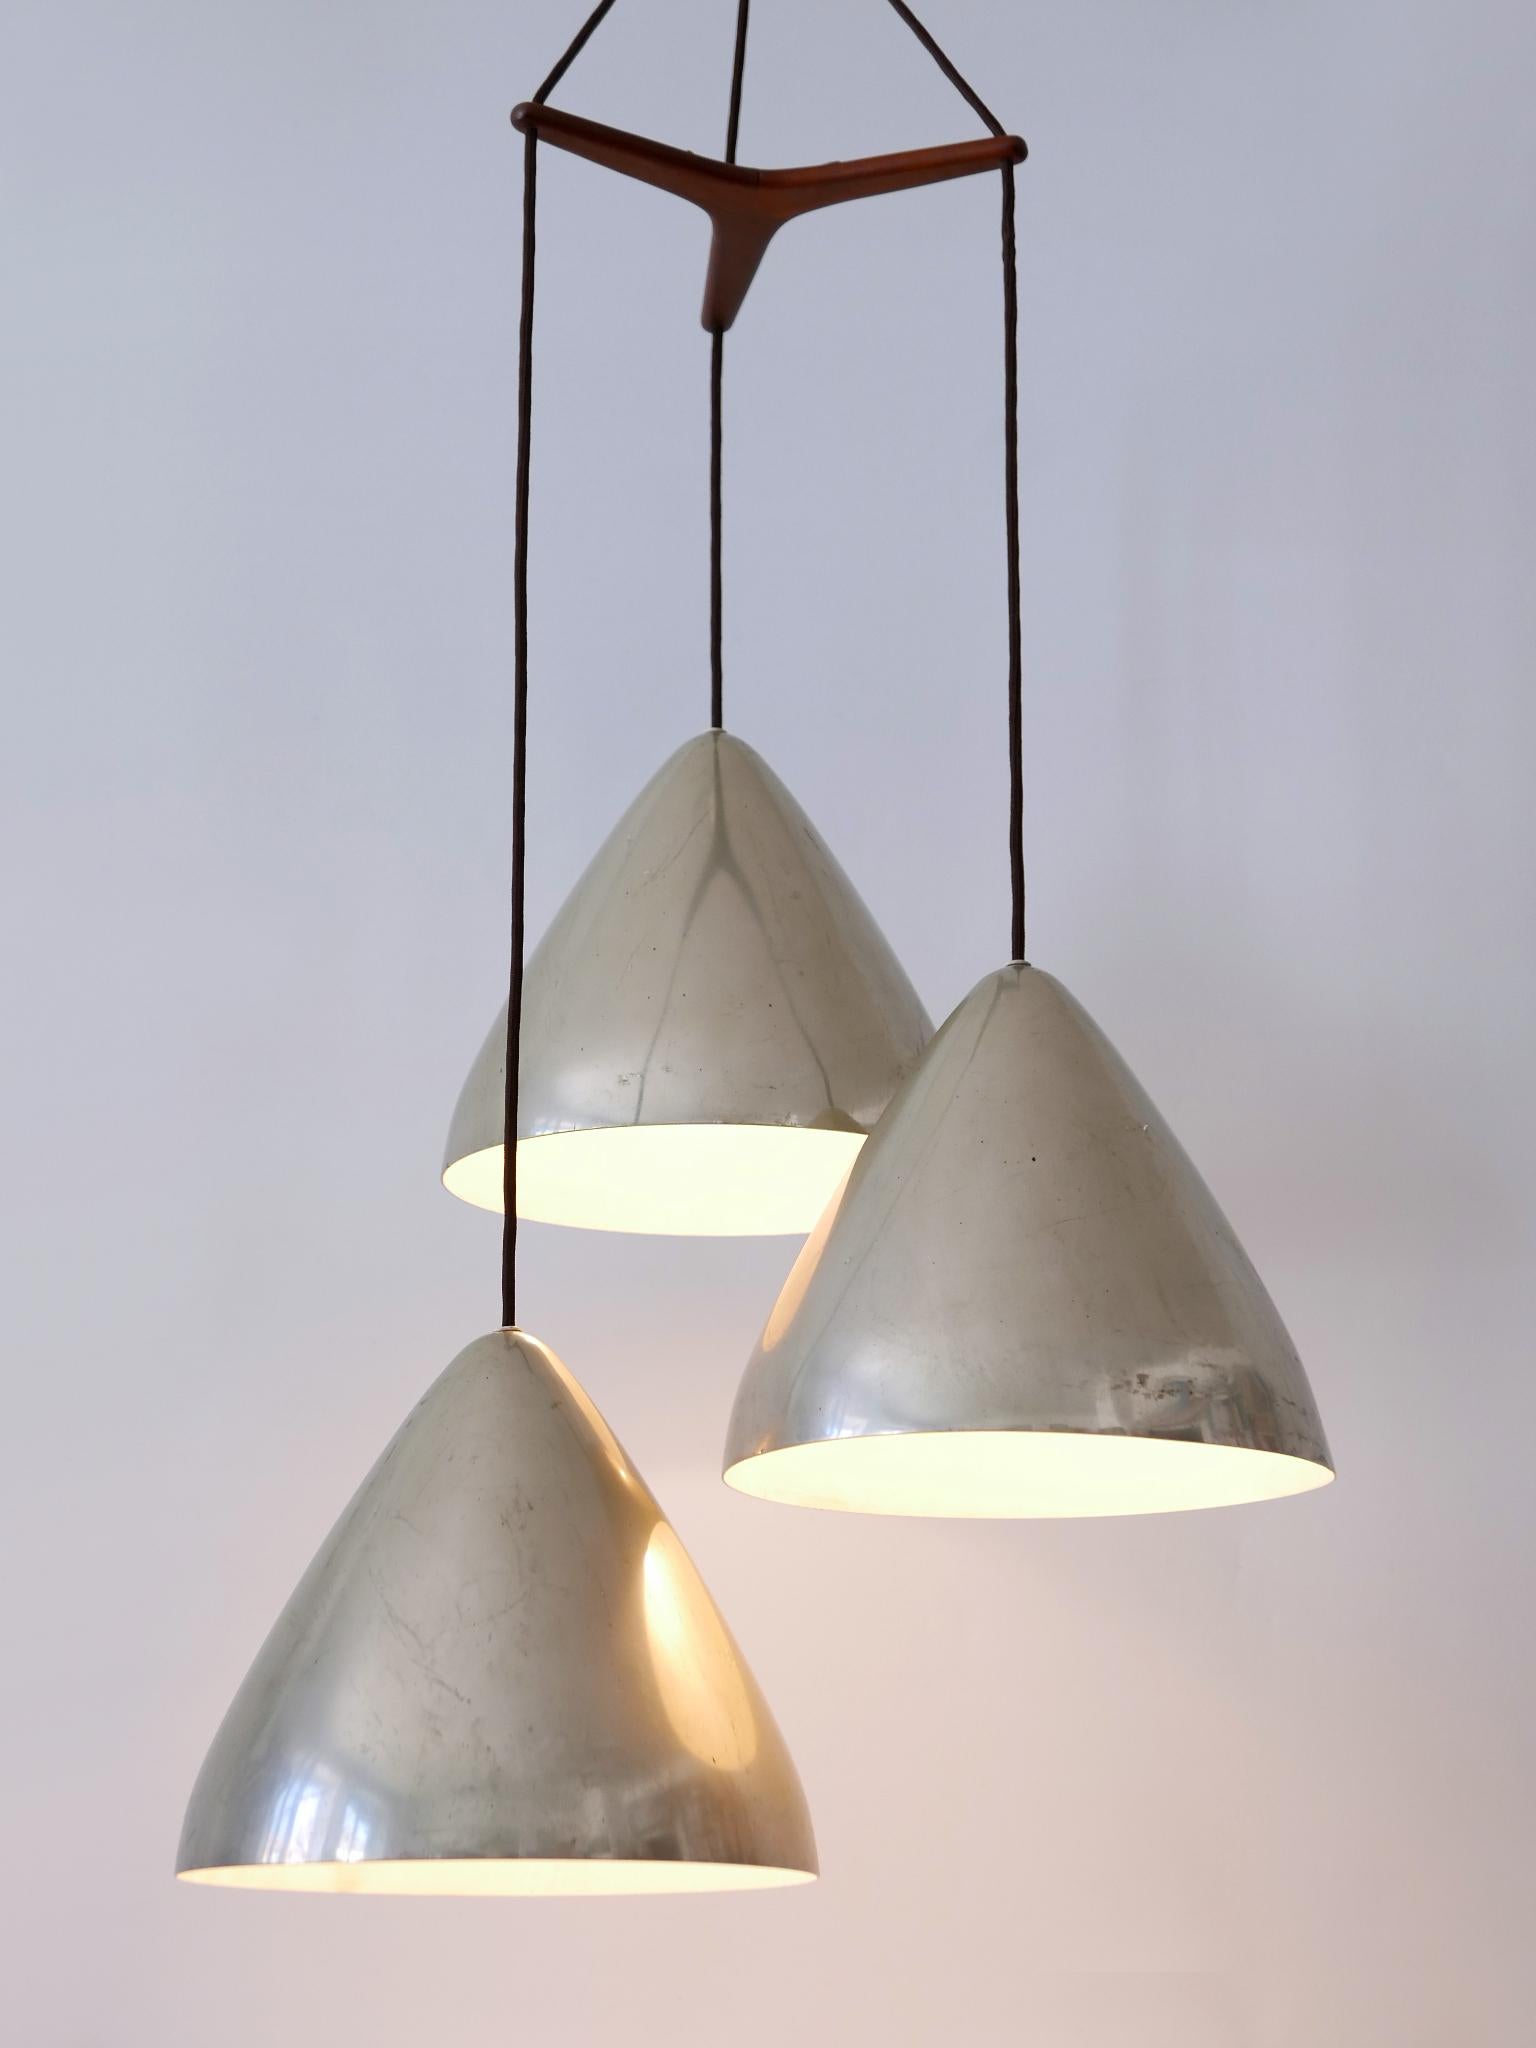 Elegant Cascading Pendant Lamp by Lisa Johansson-Pape for Orno Finland 1960s For Sale 3